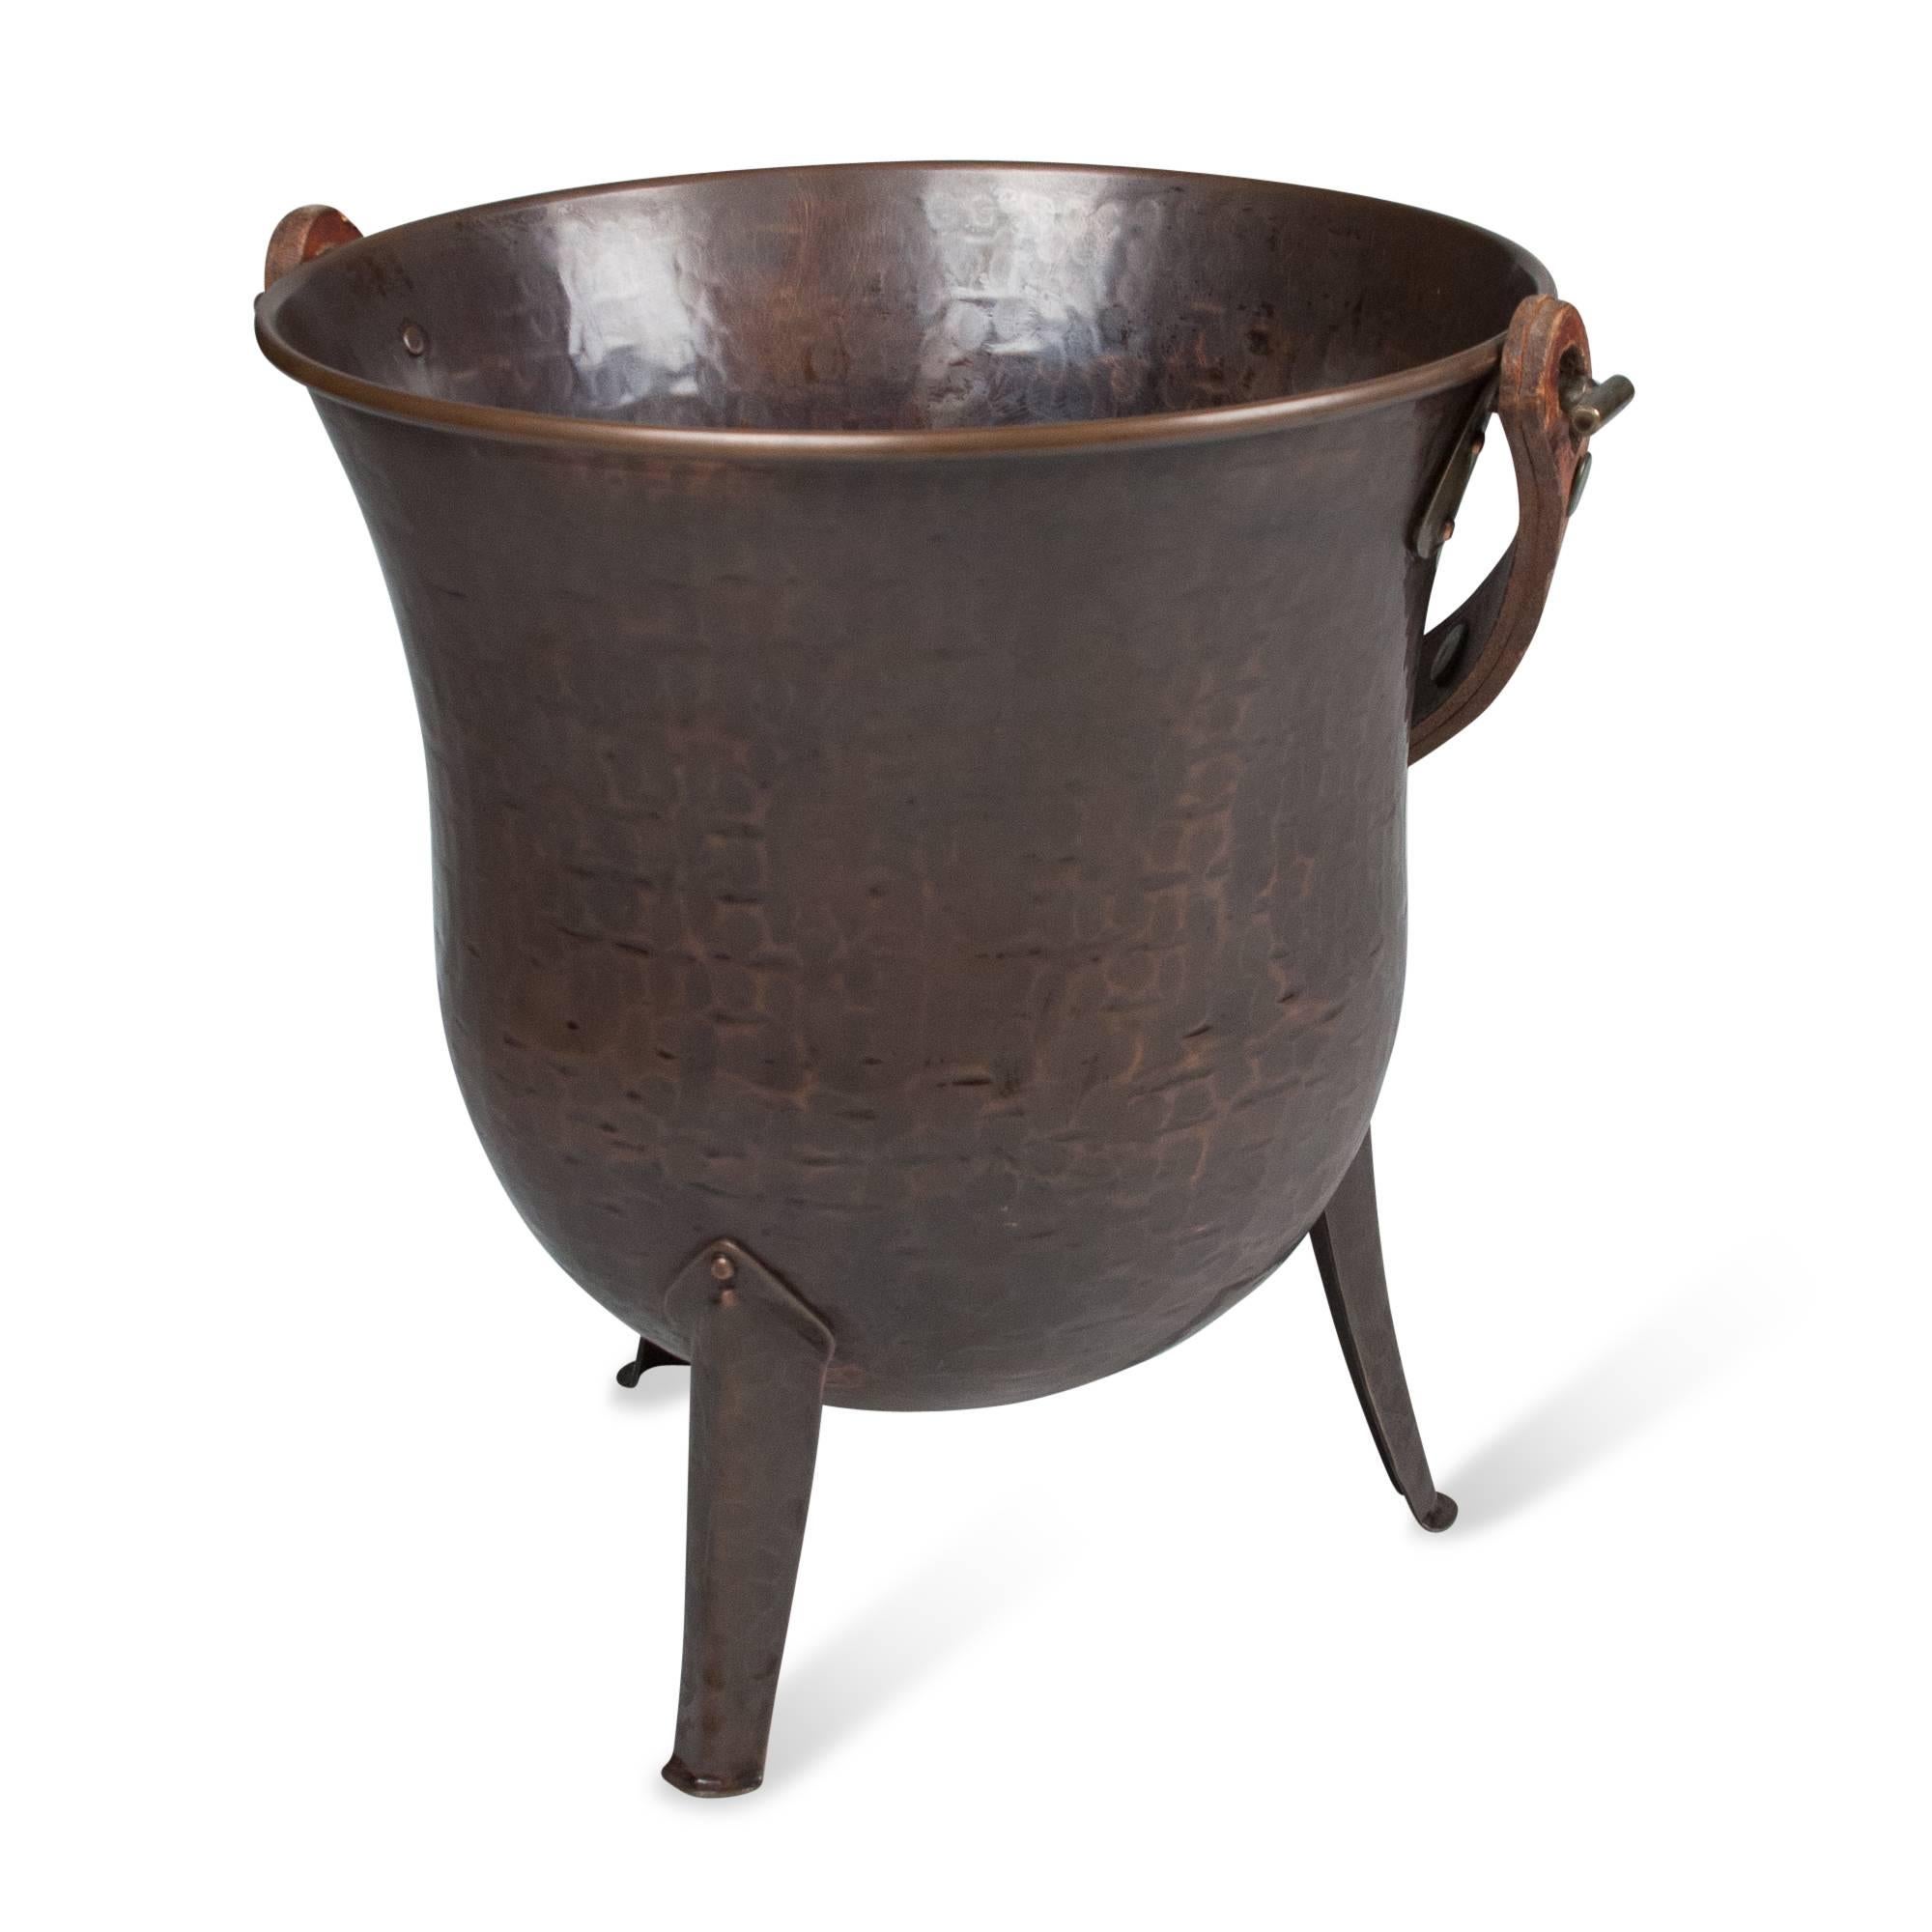 Textured and Patinated Copper Metal Bucket, German, 1930s 2